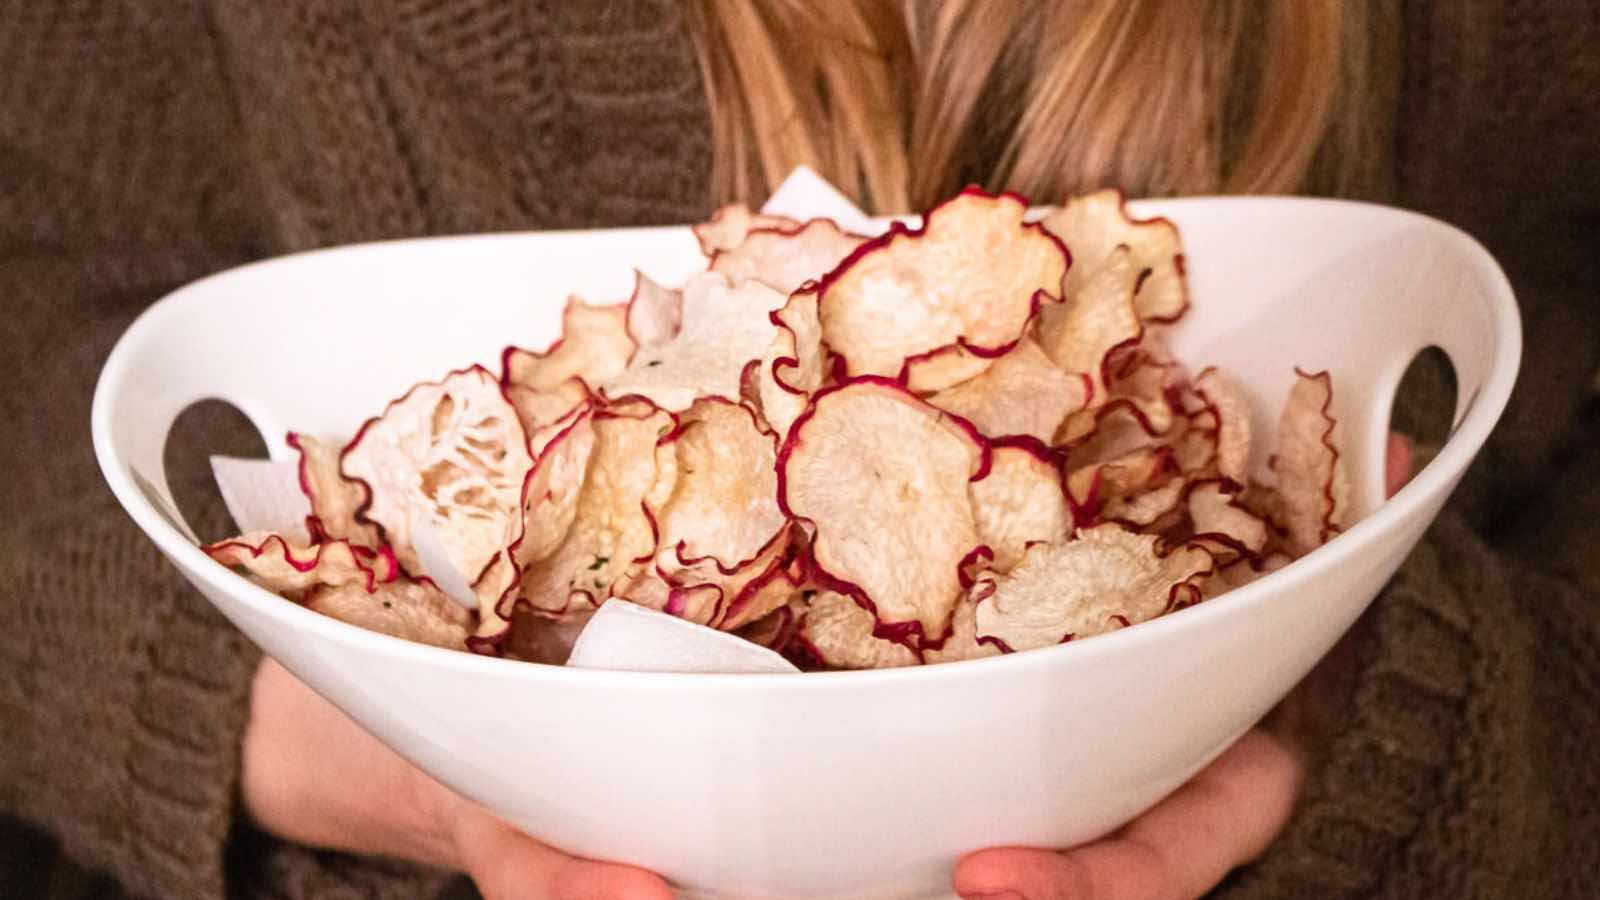 A girl holding a bowl of sliced radish chips.